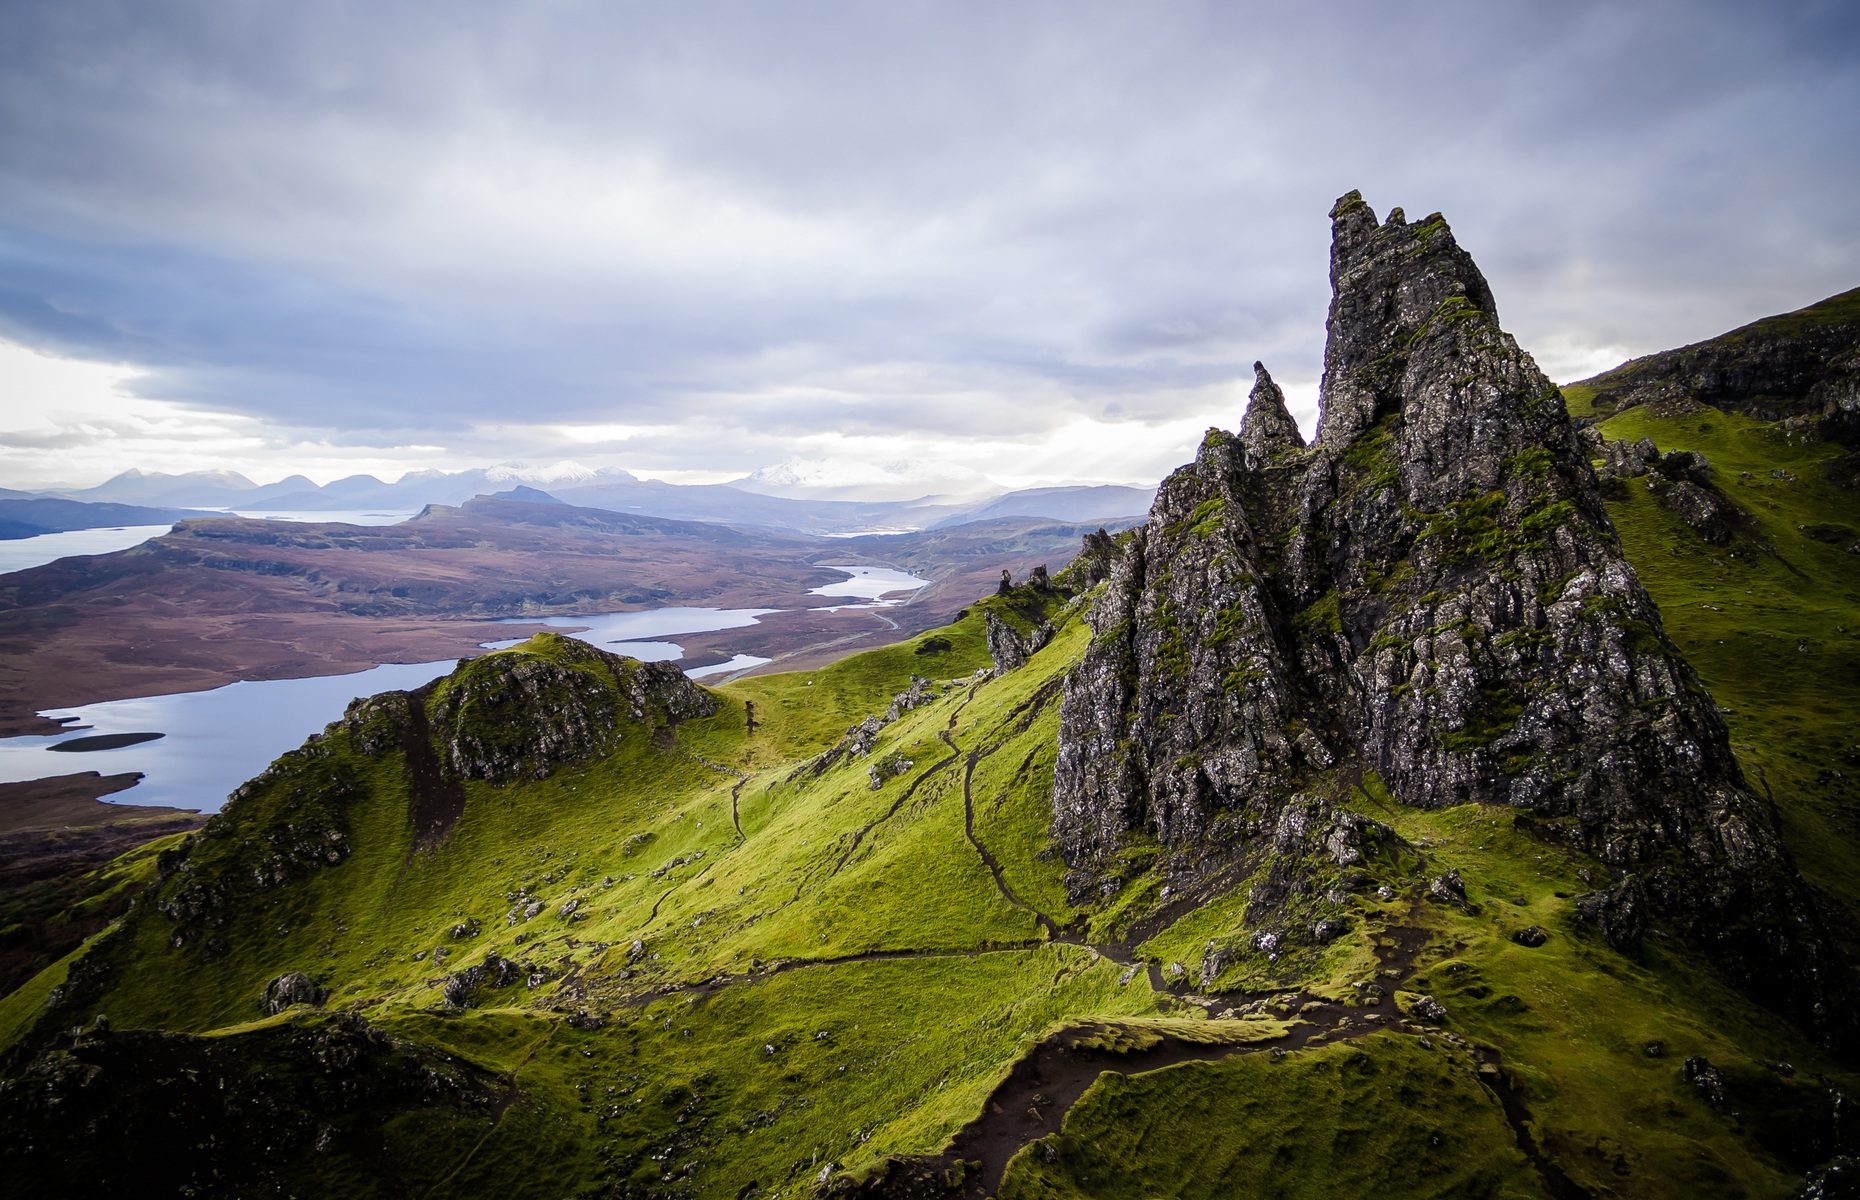 <a href="https://www.visitscotland.com/places-to-go/islands/isle-skye" rel="noreferrer noopener">Skye</a> is not only the largest island of the Inner Hebrides, it’s also an incredible destination for enjoying some of Scotland’s most beautiful scenery. Among its most enchanting stops you’ll find breathtaking landscapes at <a href="https://www.atlasobscura.com/places/kilt-rock-and-mealt-falls" rel="noreferrer noopener">Kilt Rock</a>, feel like you’ve reached the end of the world at Neist Point Lighthouse, and enjoy tasty fish and chips in the colourful town of Portree.